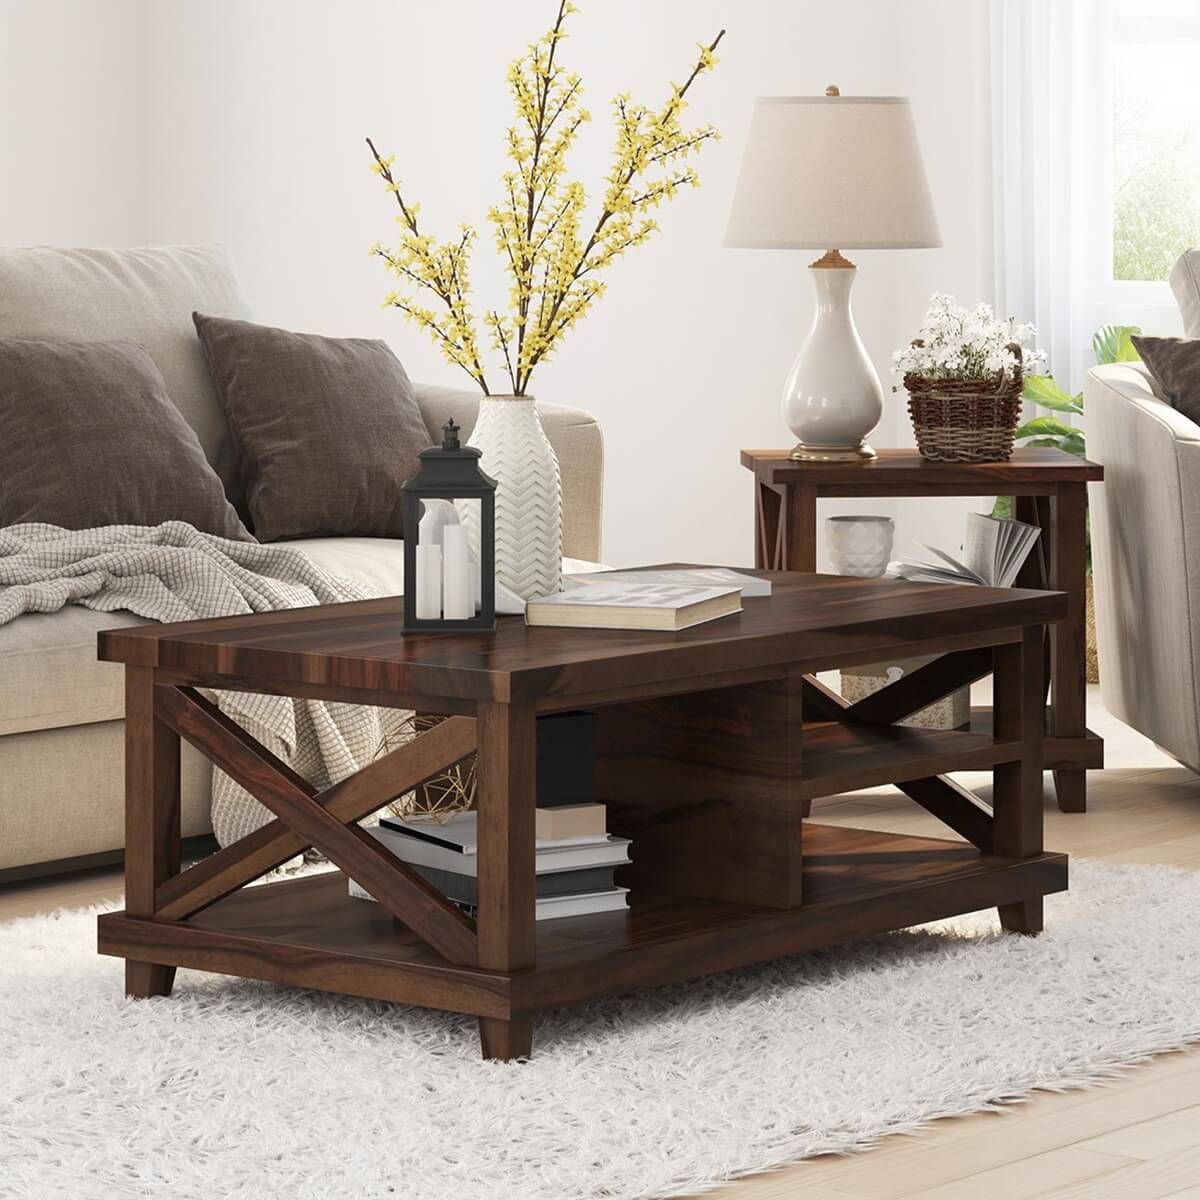 Antwerp Solid Wood Rustic Two Tier Coffee Table In Wood Coffee Tables With 2 Tier Storage (View 2 of 15)